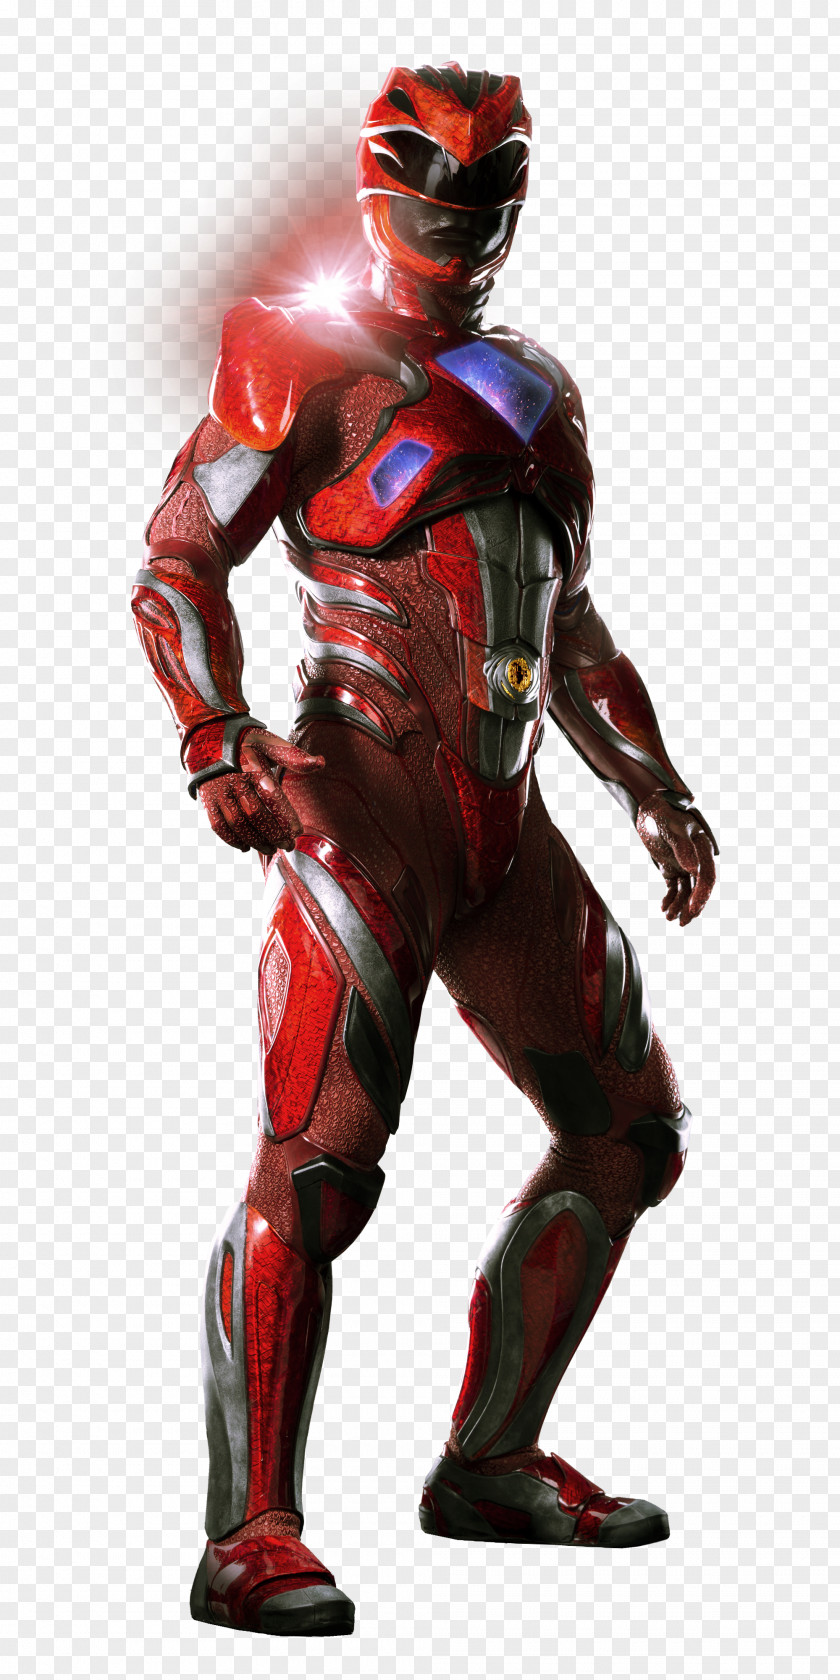 Red 2017 Billy Cranston Jason Lee Scott Mighty Morphin Power Rangers Ranger Tommy Oliver PNG